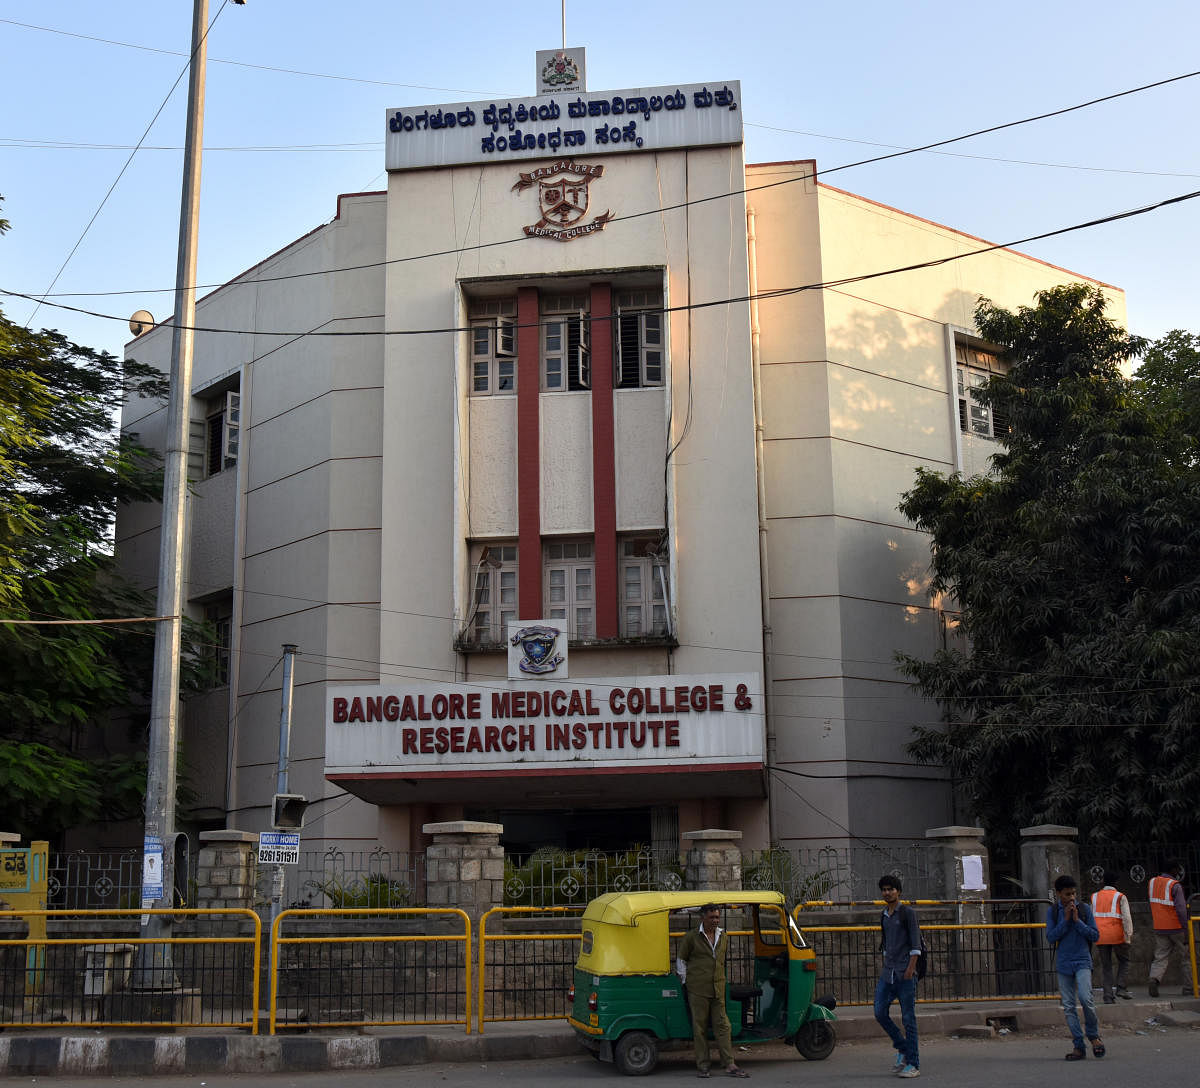 Bangalore Medical College and Research Institute.